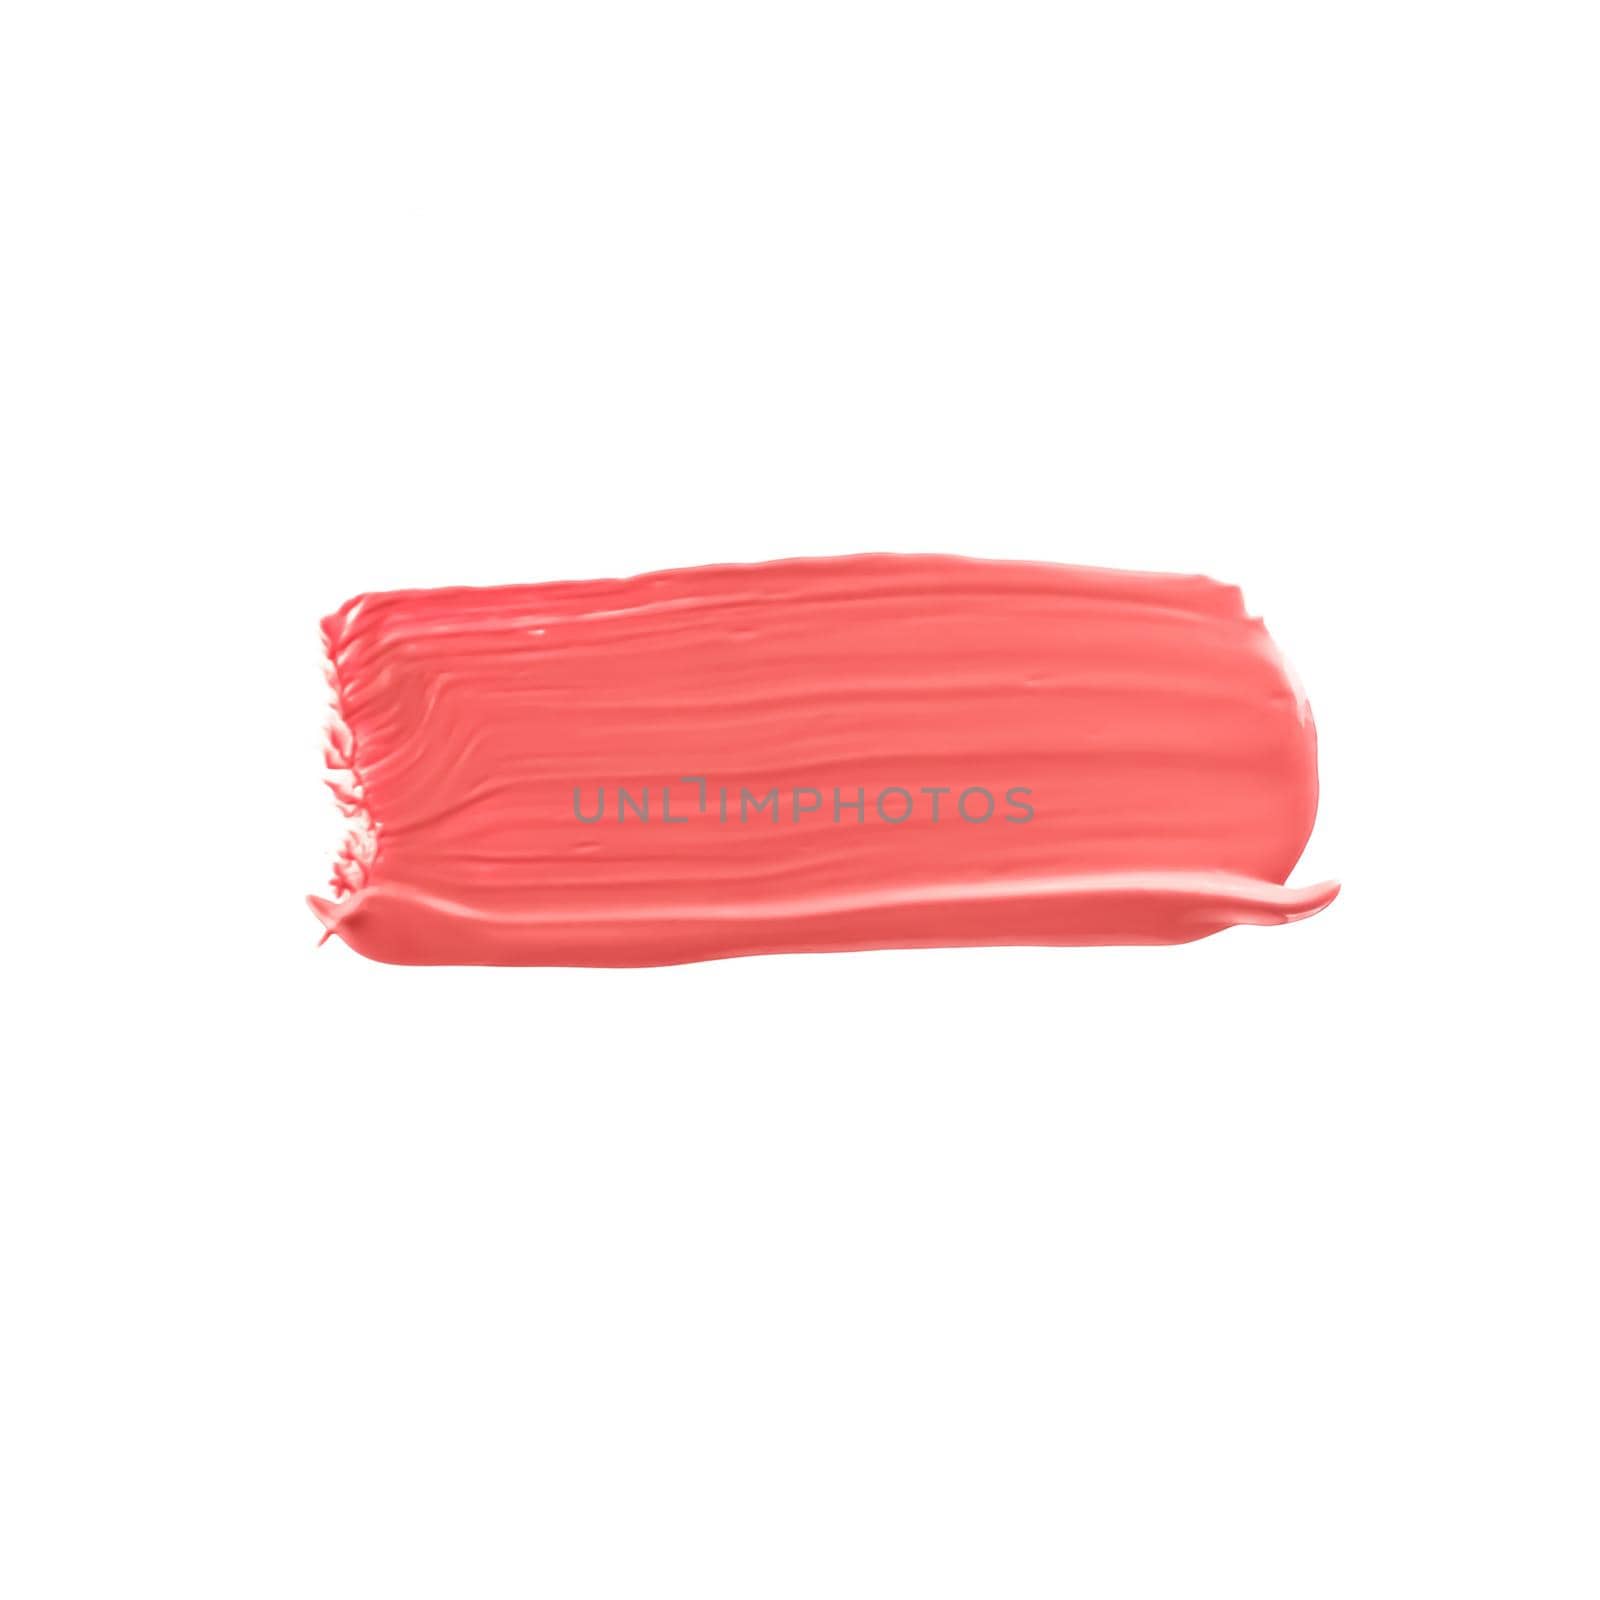 Pastel coral beauty swatch, skincare and makeup cosmetic product sample texture isolated on white background, make-up smudge, cream cosmetics smear or paint brush stroke by Anneleven